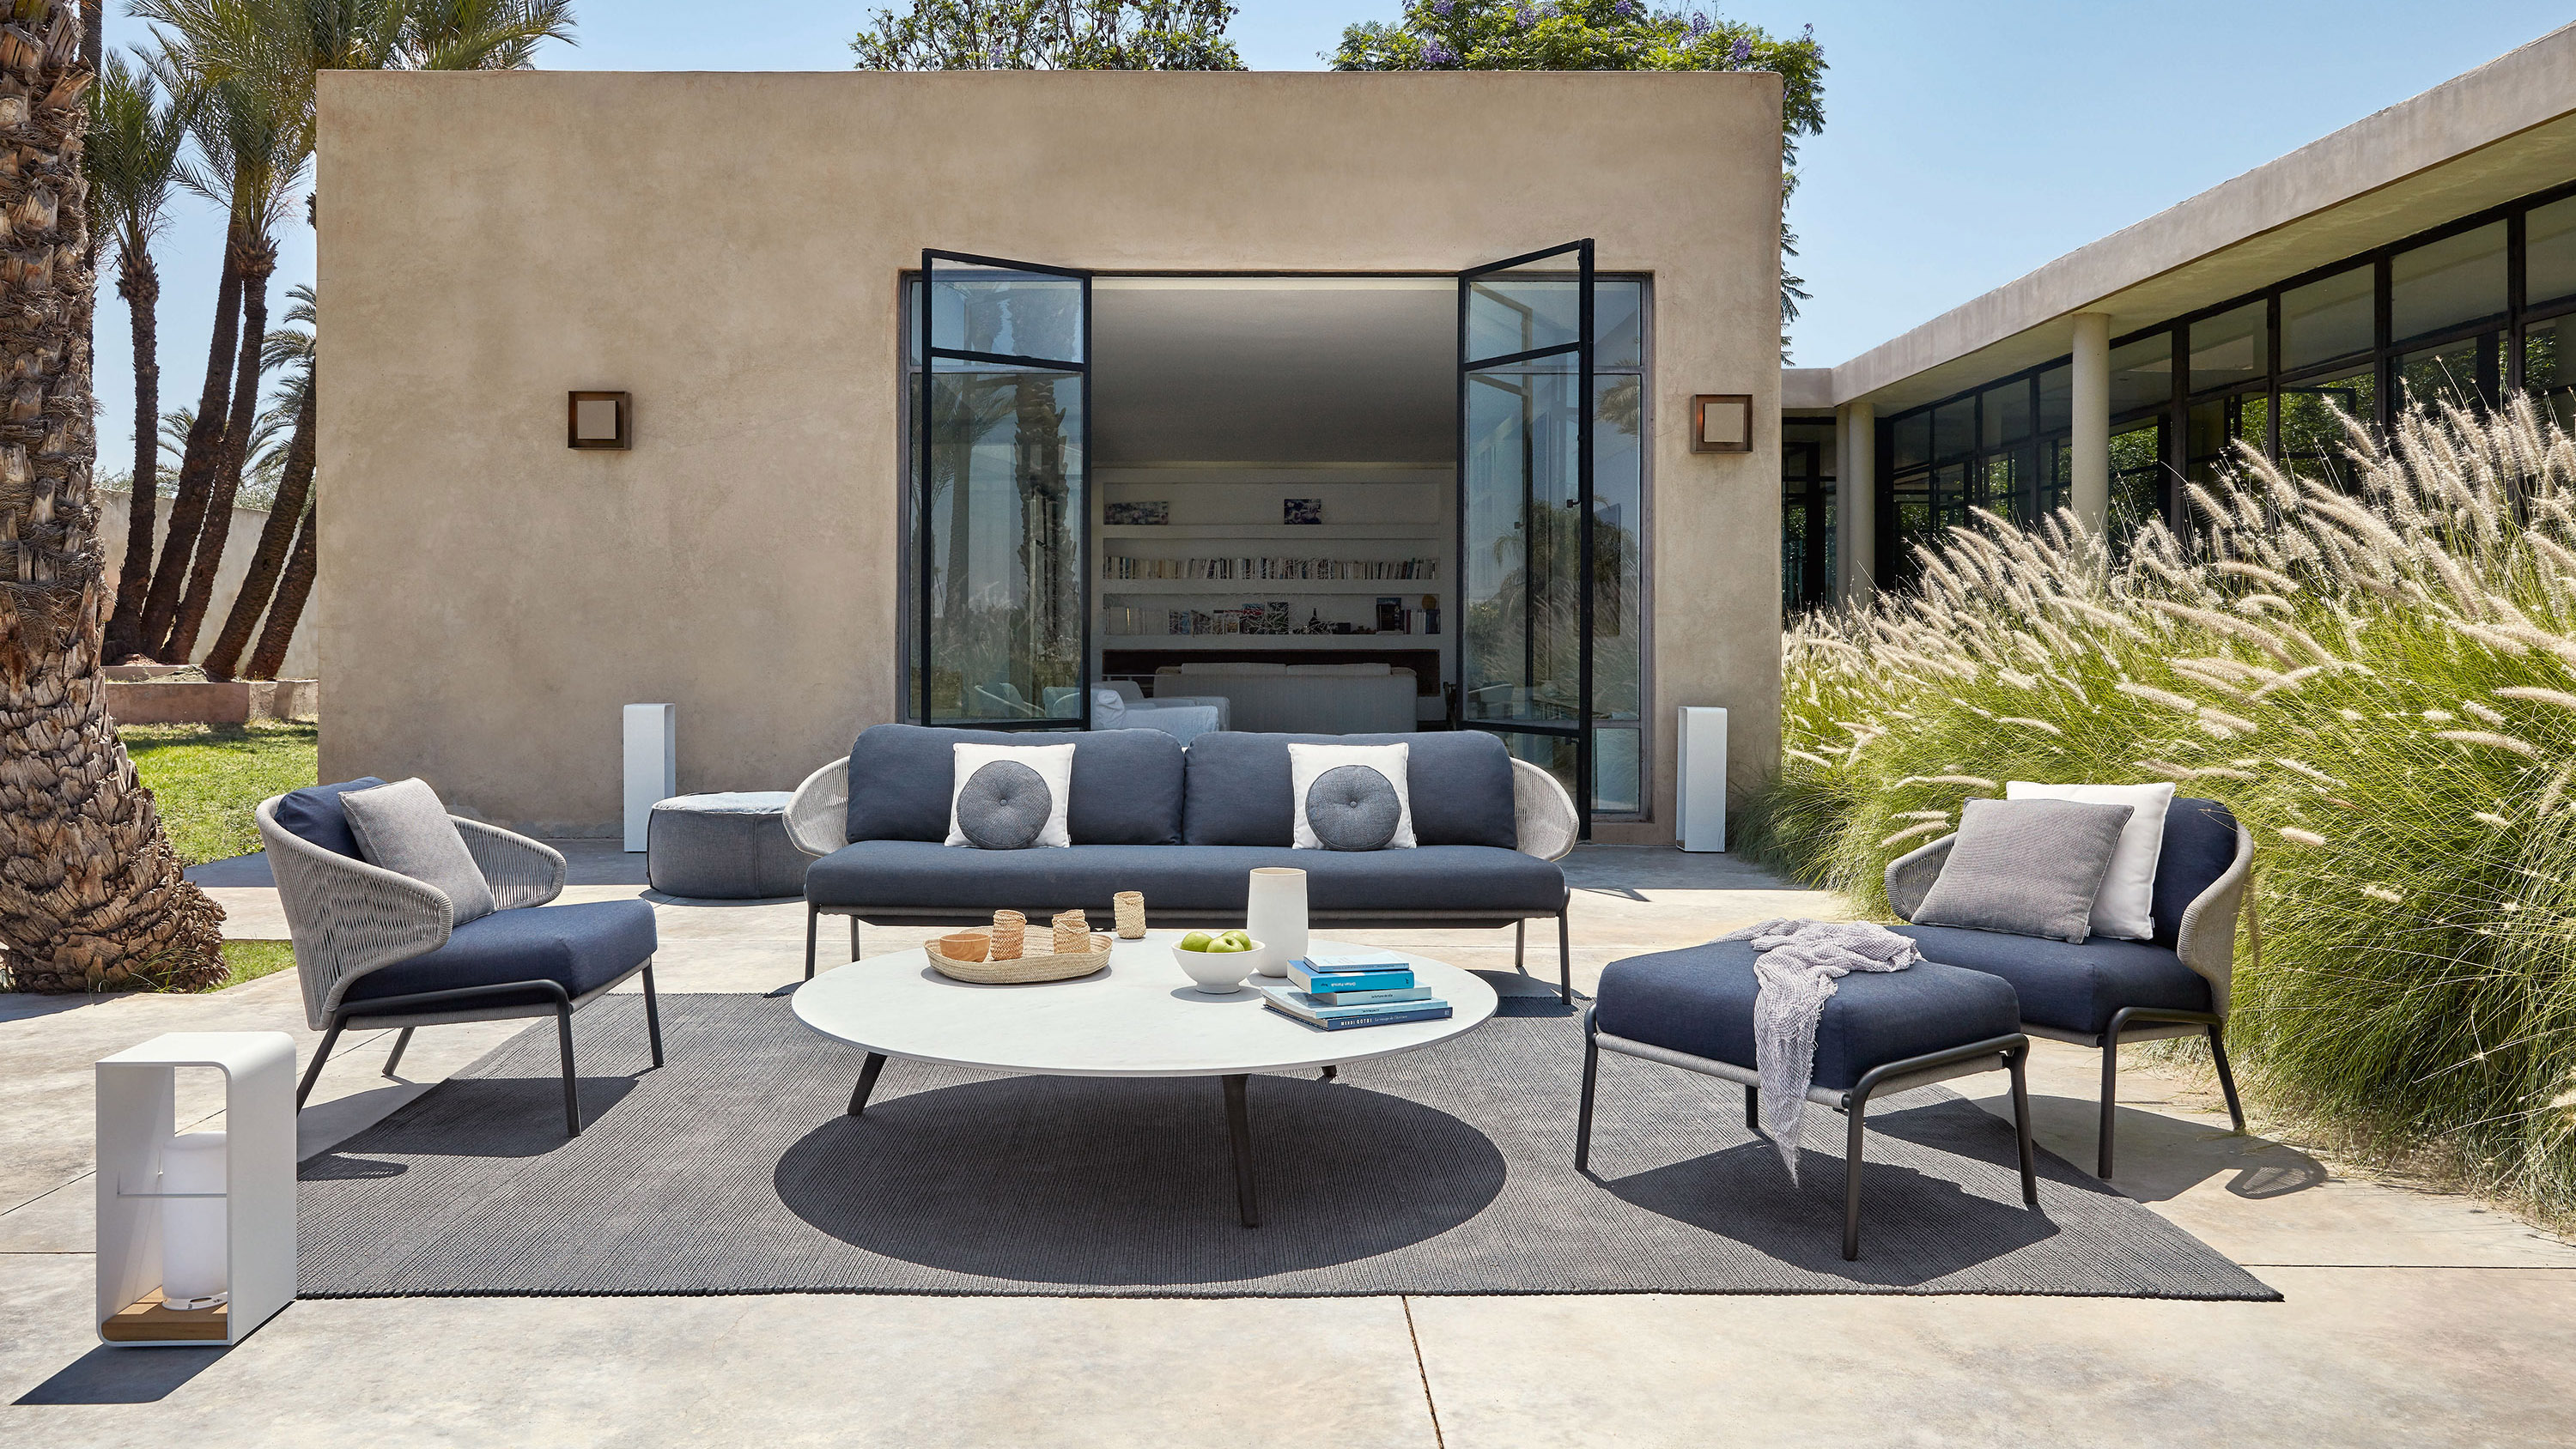 Patio furniture ideas 18 designs for stylish outdoor living ...